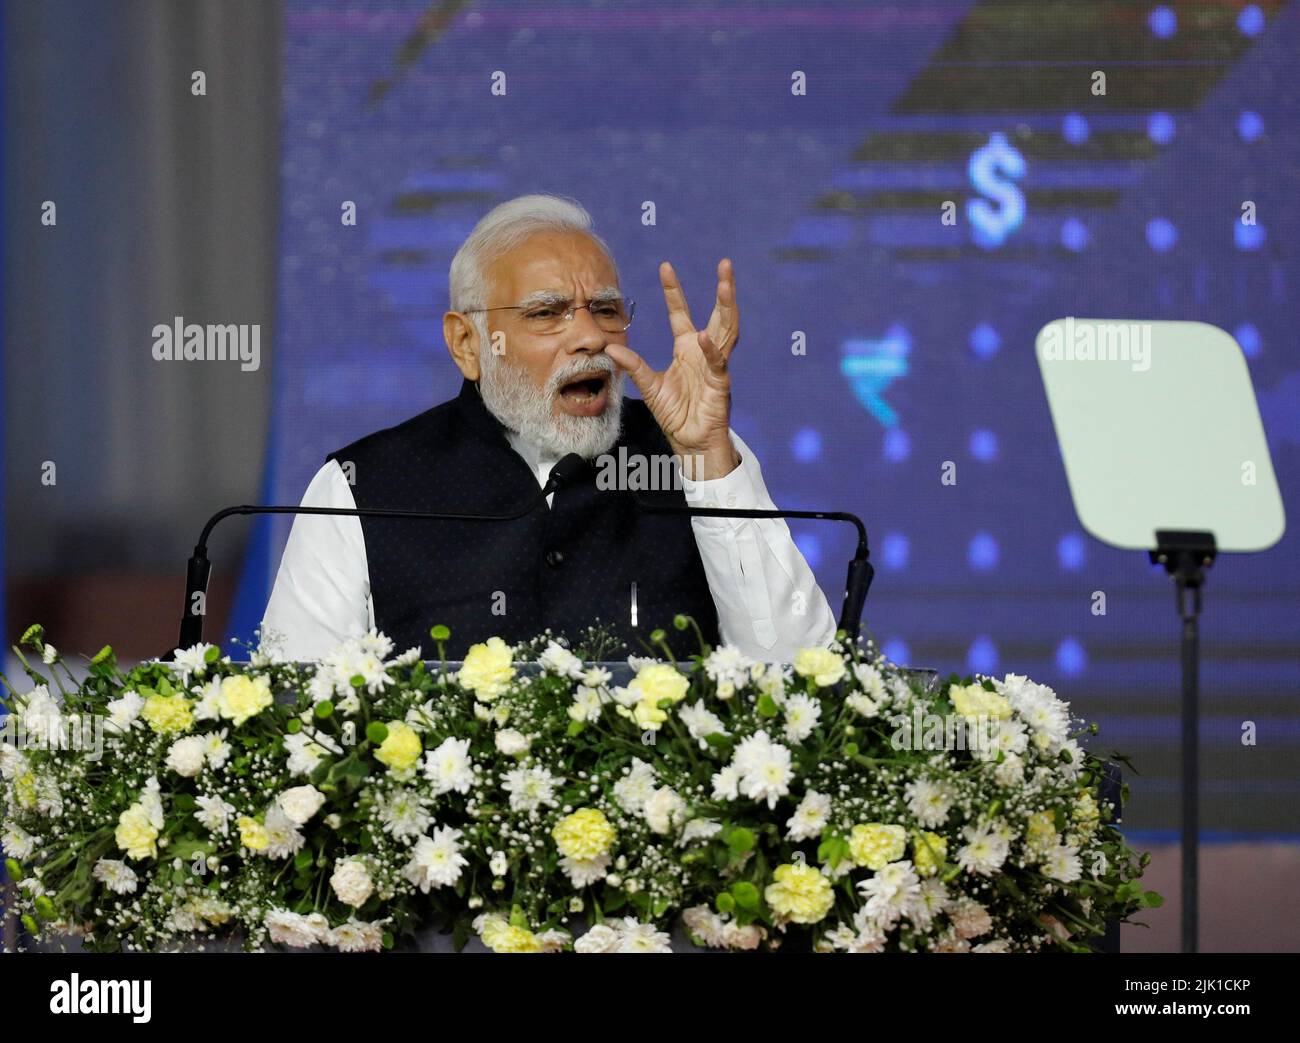 Prime Minister Narendra Modi gestures as he delivers a speech after he inaugurated India International Bullion Exchange (IIBX), India's first international bullion exchange, at Gujarat International Finance Tec-City, or GIFT City in Gandhinagar, India, July 29, 2022. REUTERS/Amit Dave Stock Photo